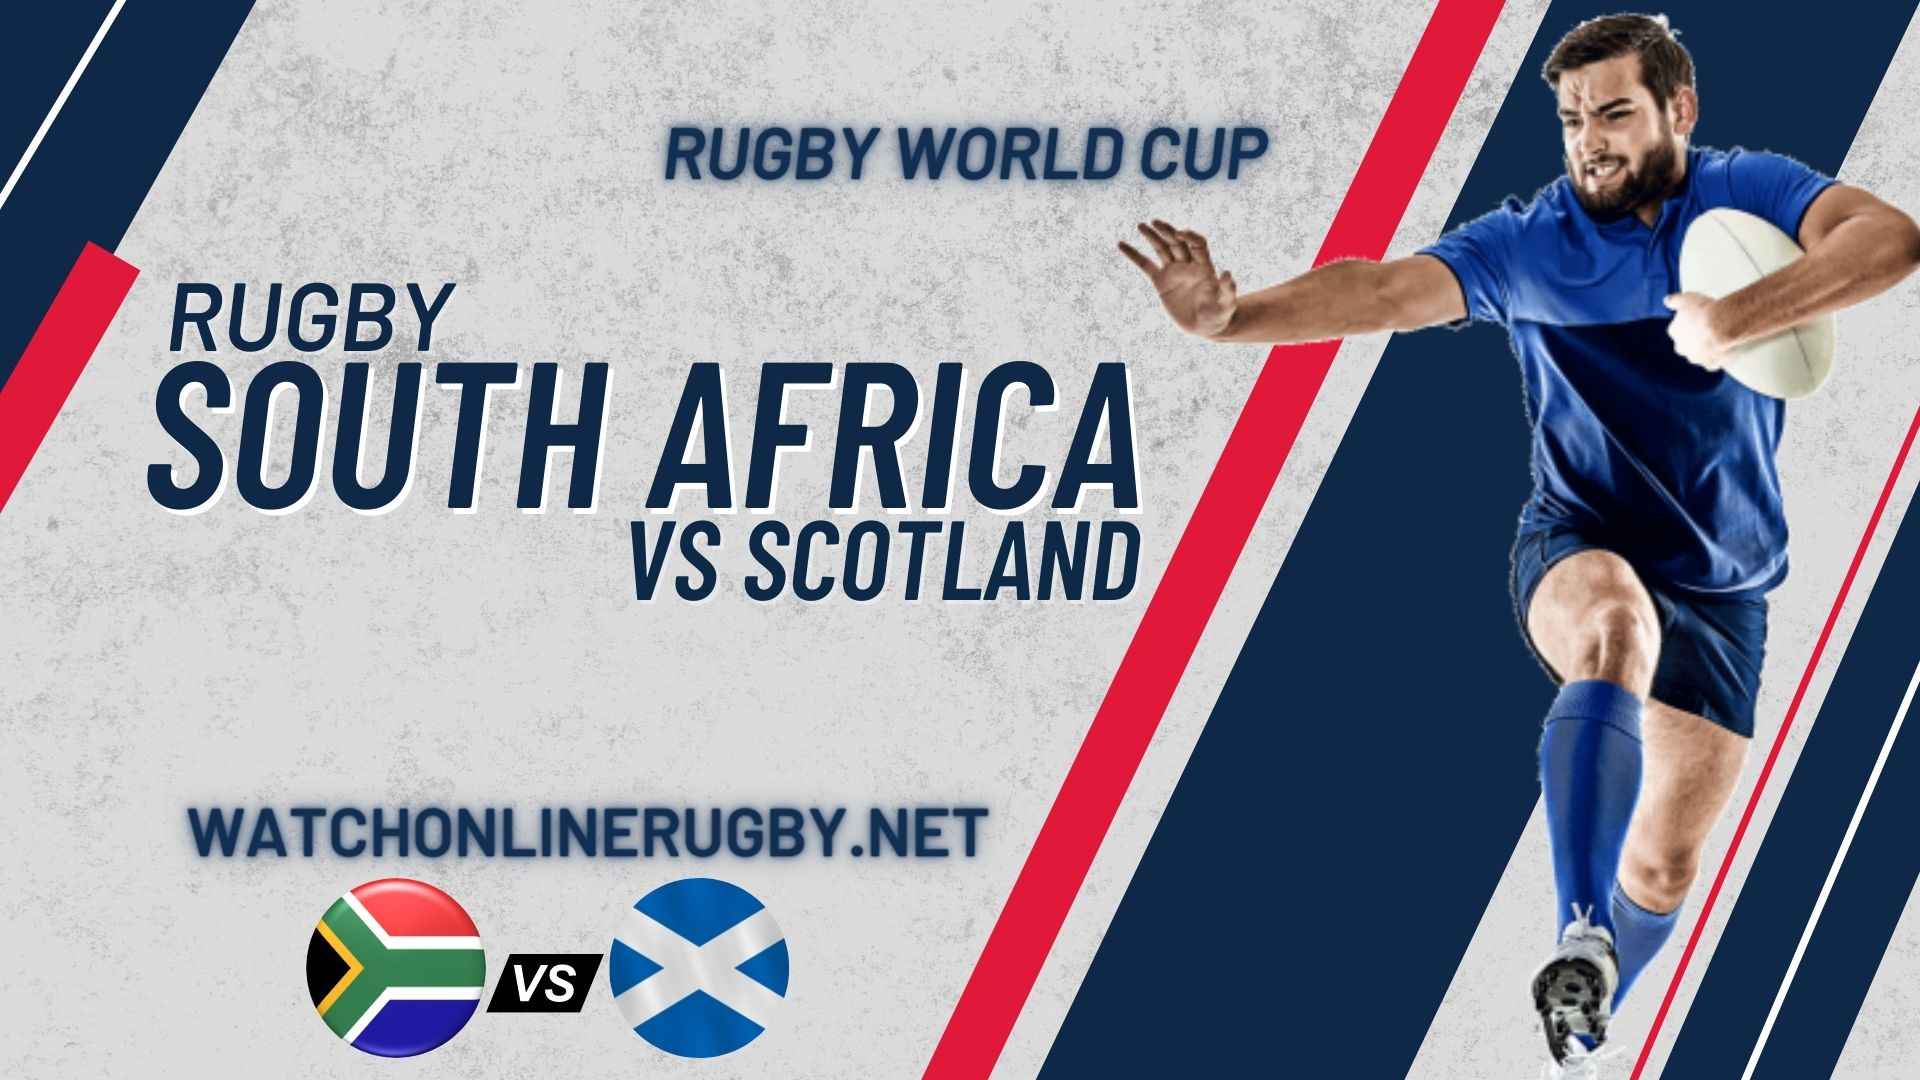 Scotland VS South Africa Live Rugby